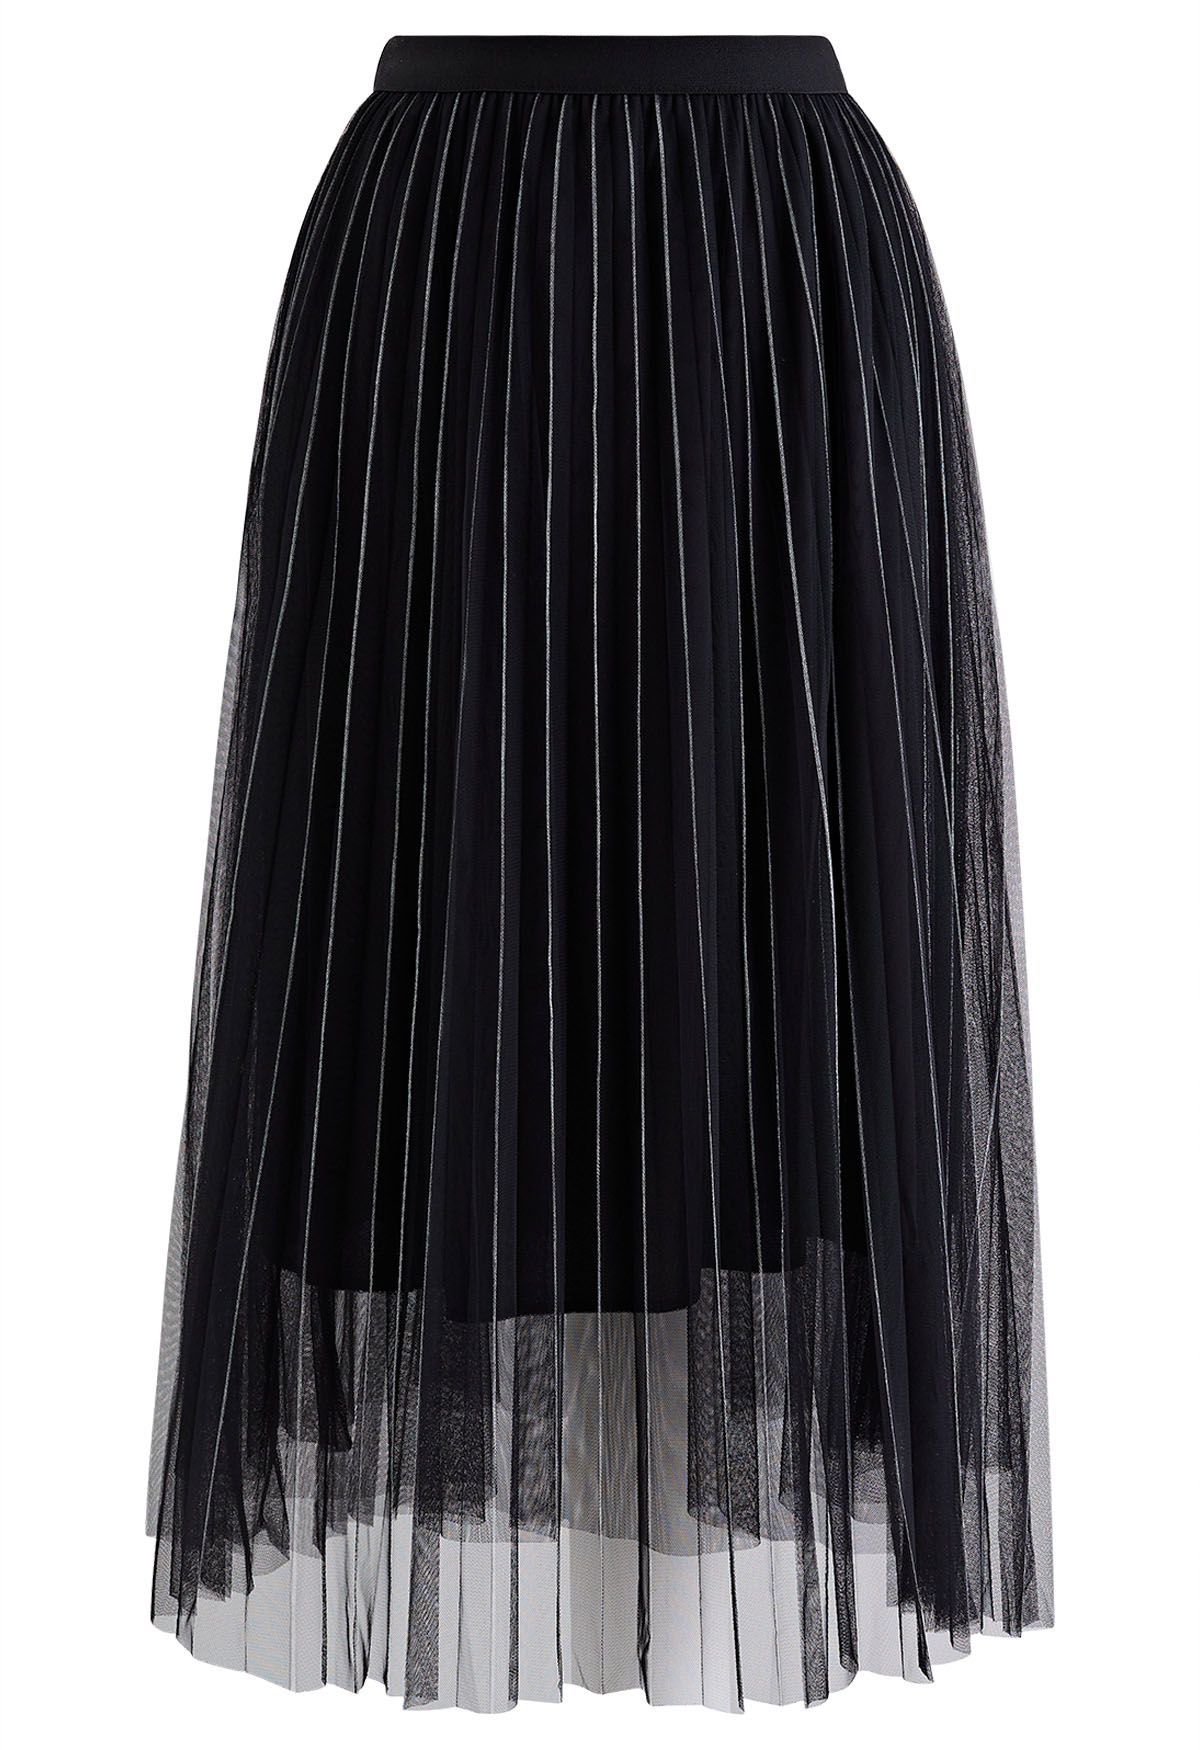 Contrast Lines Pleated Mesh Tulle Midi Skirt in Black | Chicwish